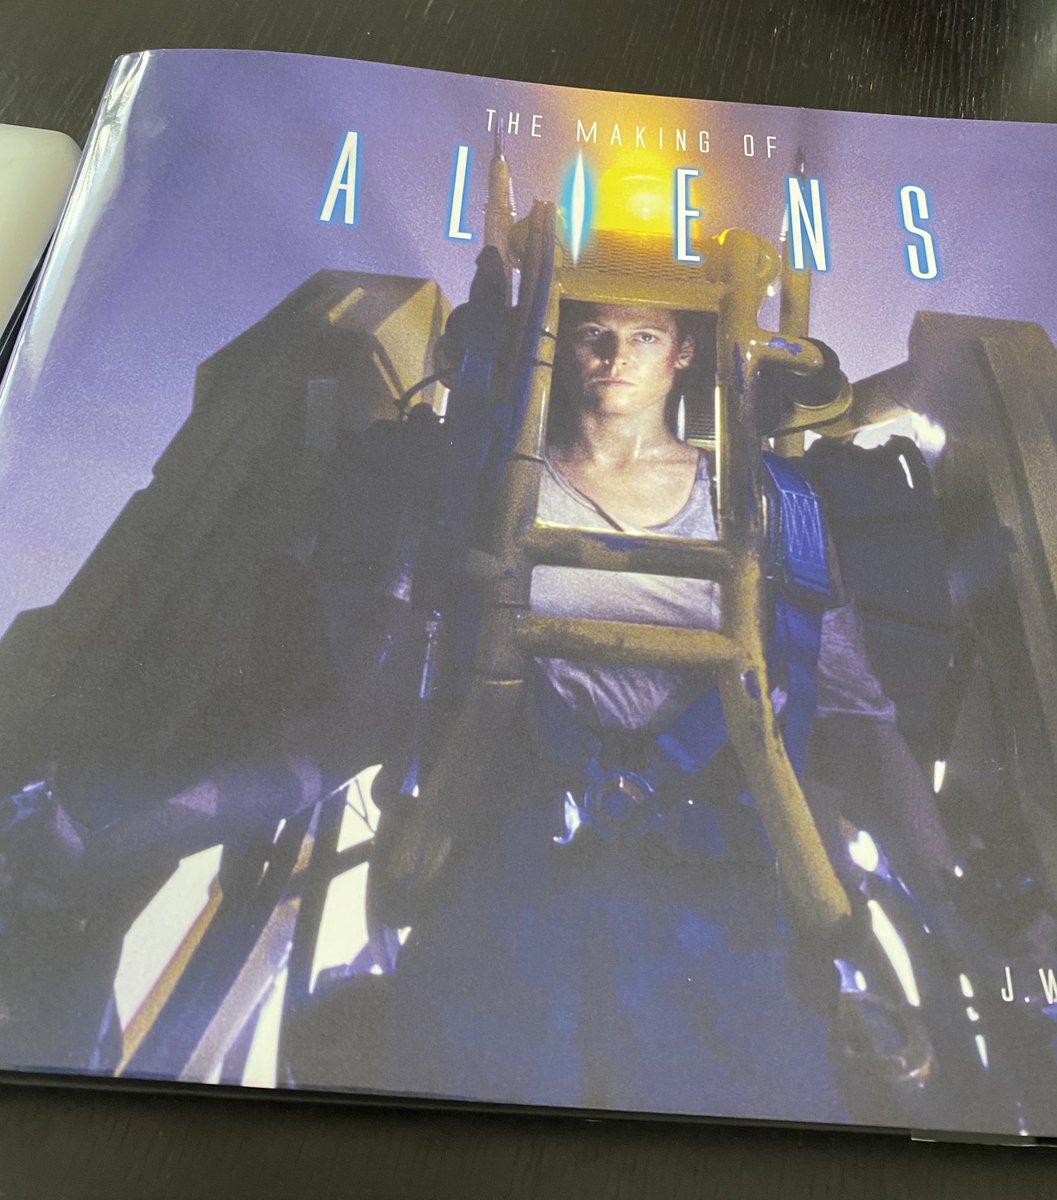 Perfect, just got it for the weekend. Congrats @jwrinzler, it’s a beautiful book. 
@TitanBooks #TheMakingOfAliens